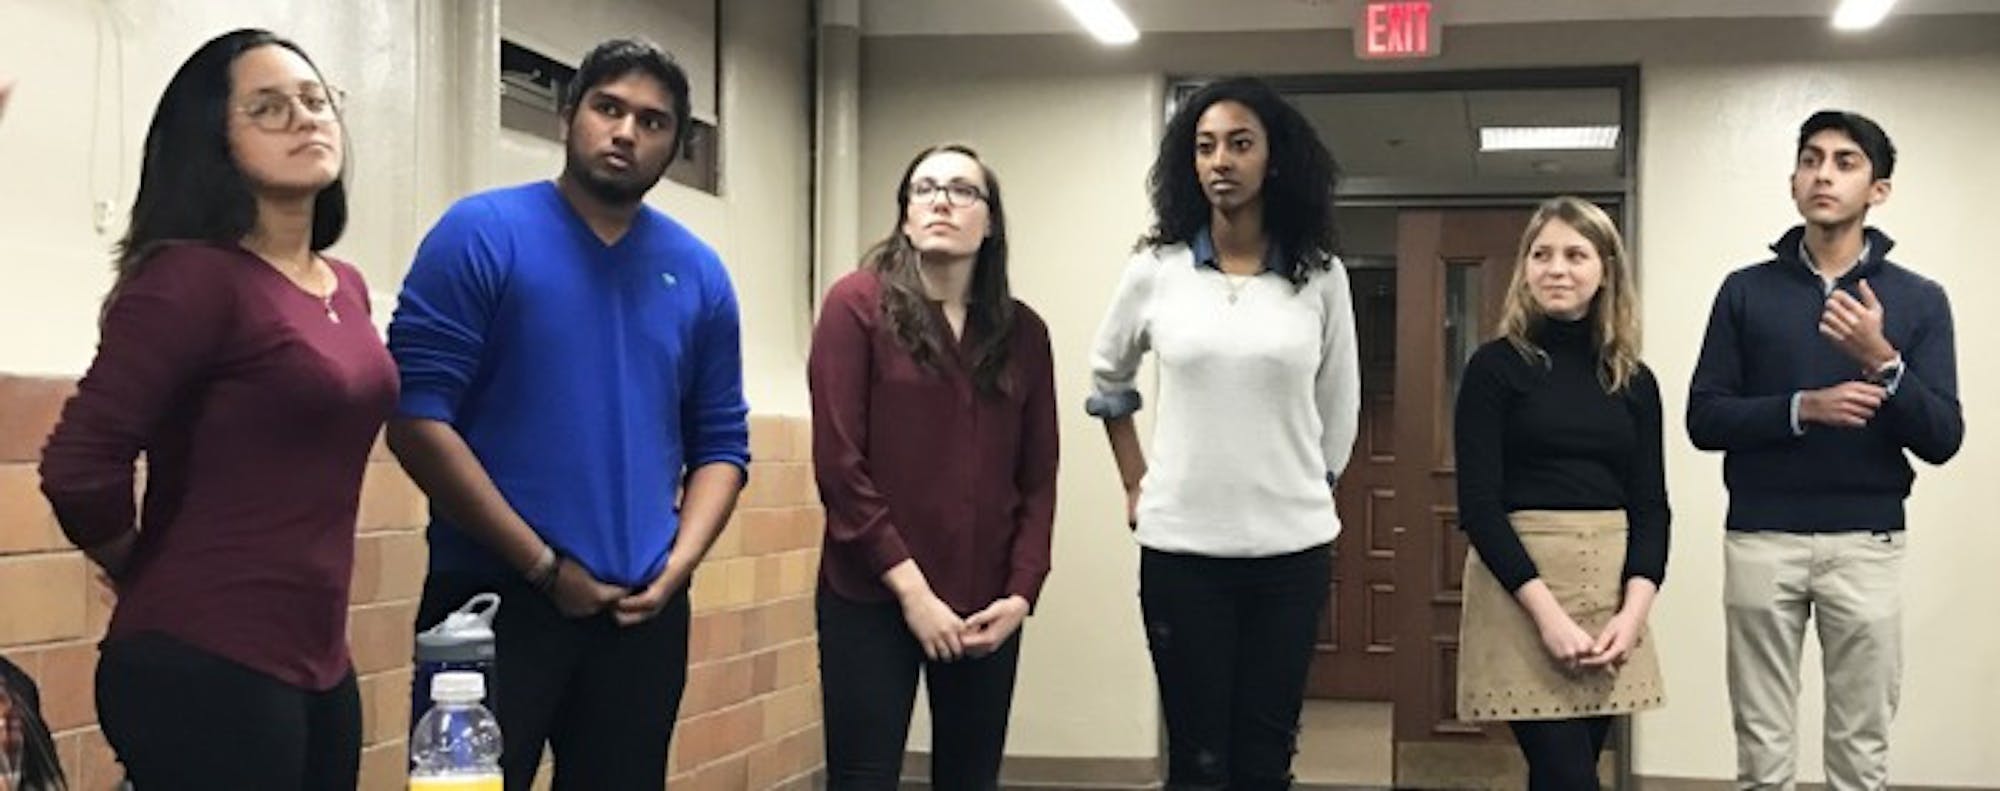 Candidates and campaign managers answer questions at We Stand For's panel Thursday night. Pictured, from Left to Right: Daniela Naramatsu, Rohit Fonseca and Madi Purrenhage; and Sibonay Shewit, Becca Blais and Prathm Juneja.